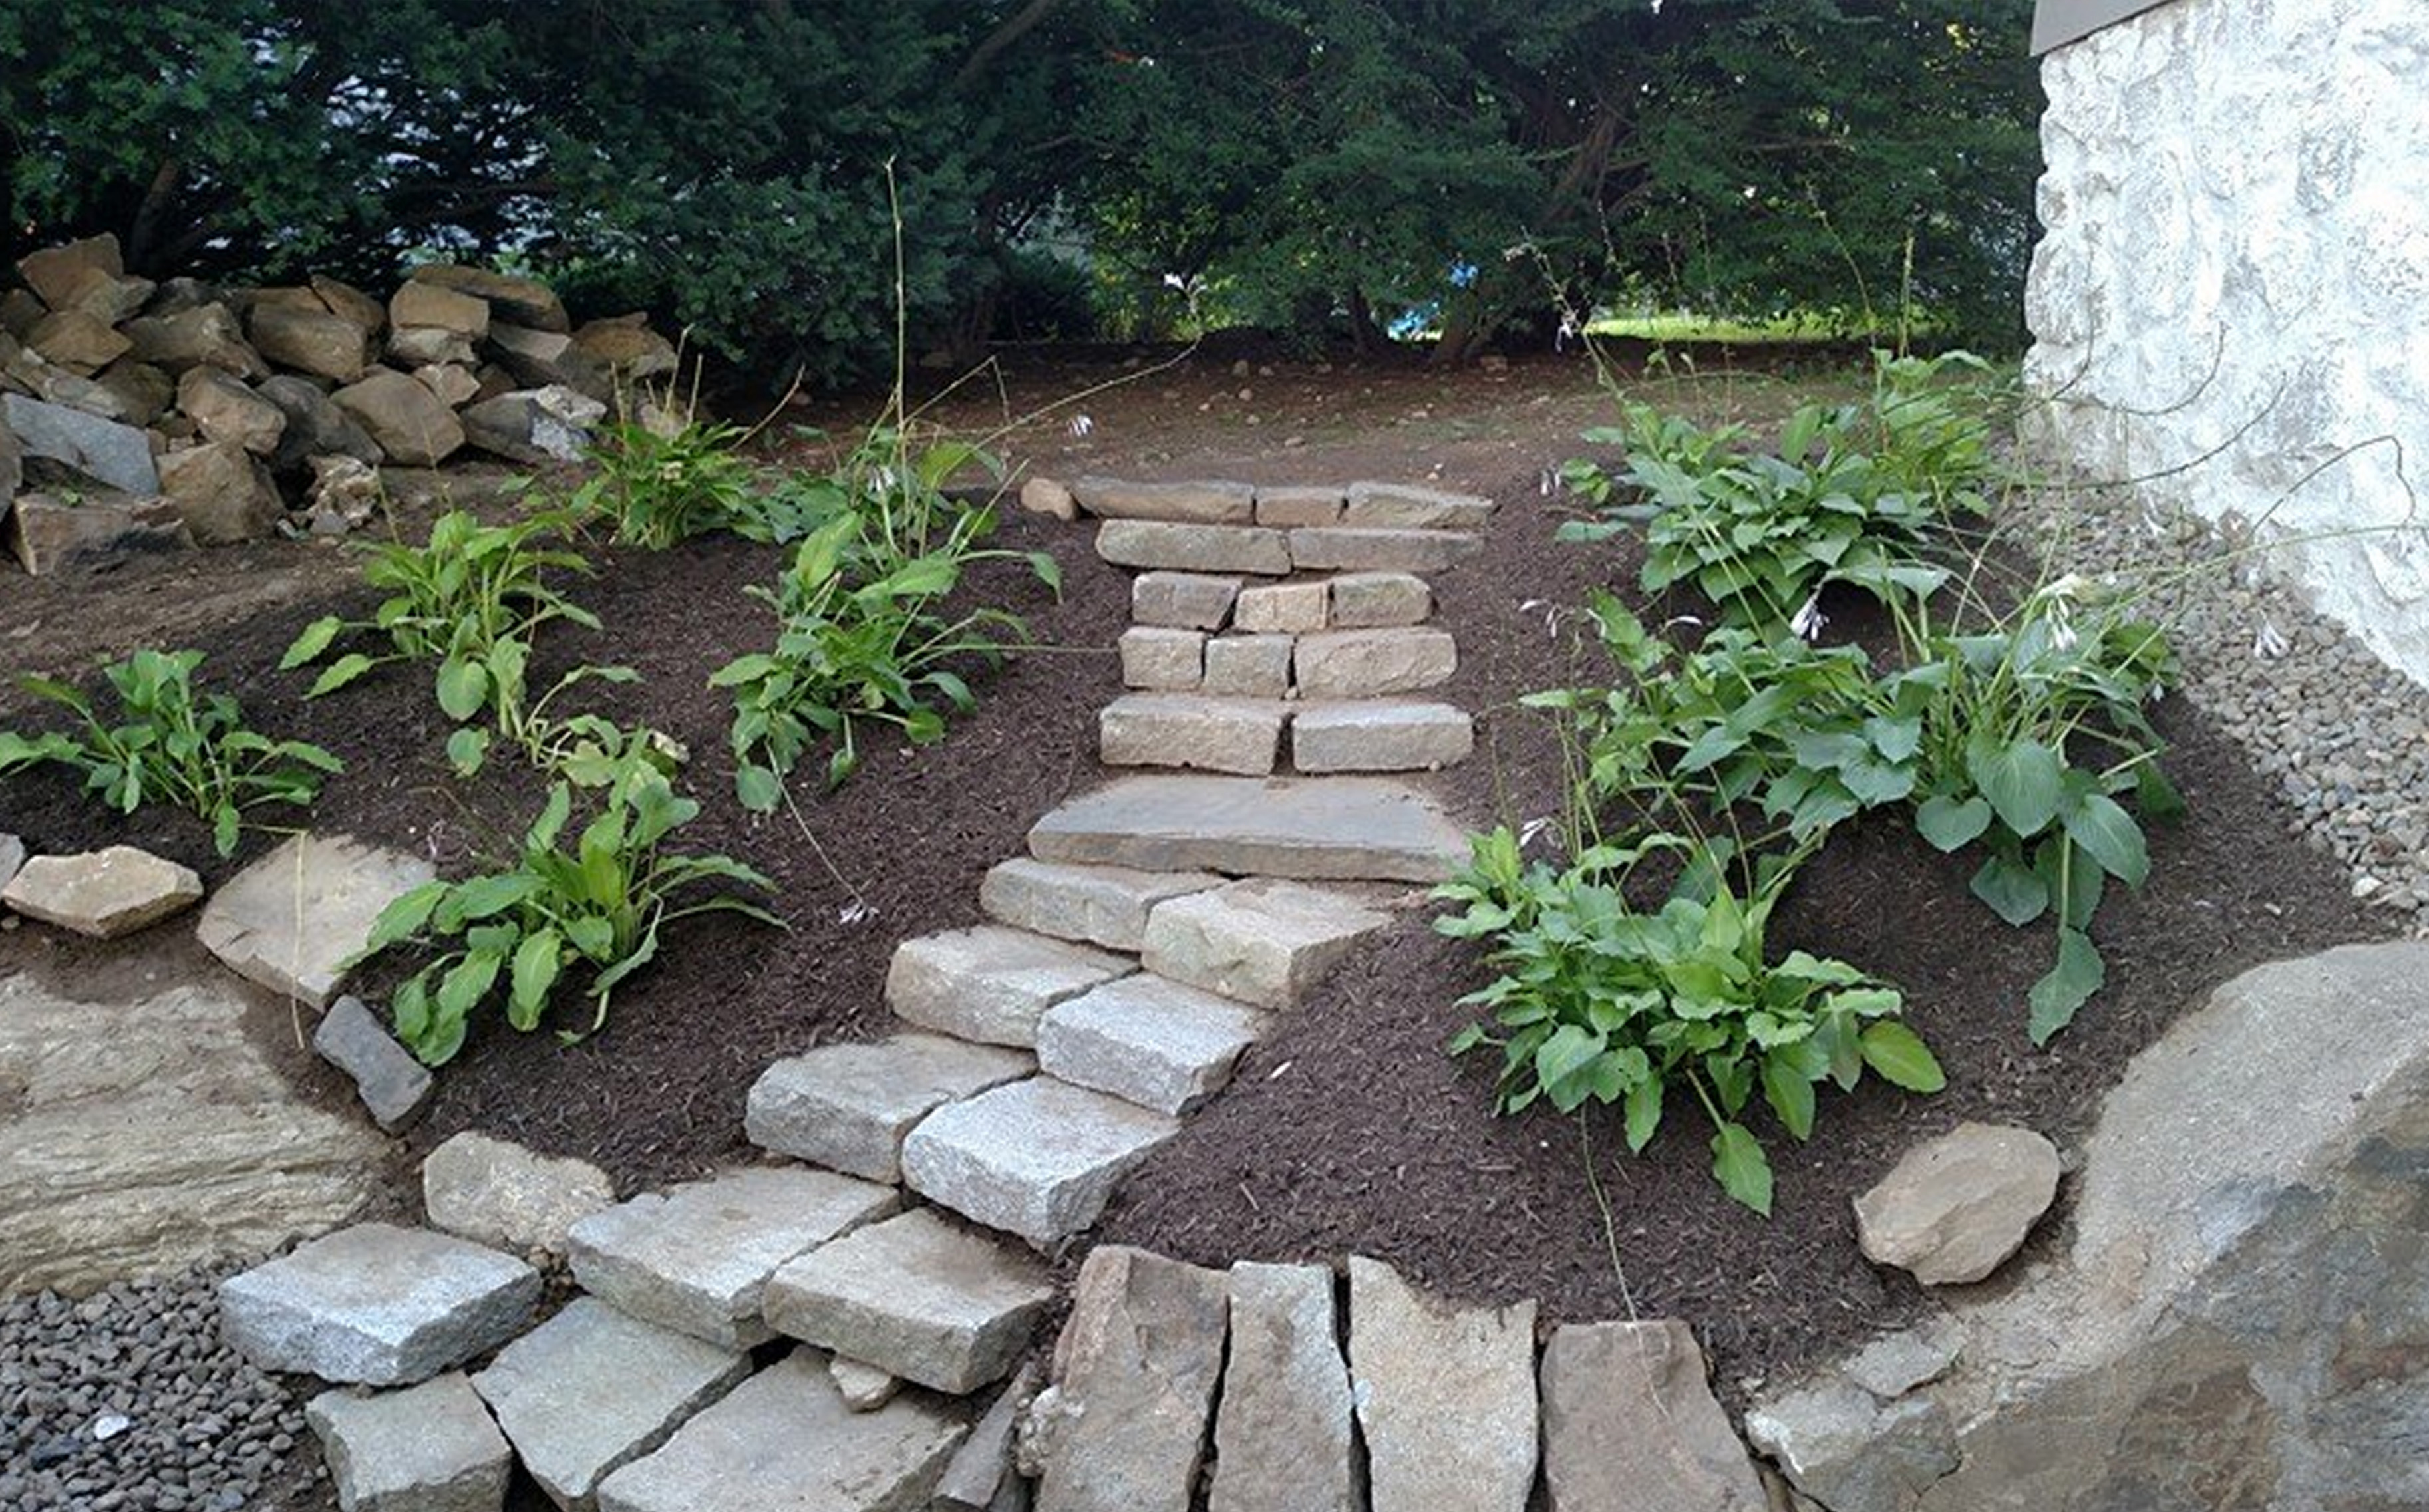 Thumbnail of completed plant bed, with stone stairs, mulch, and stone